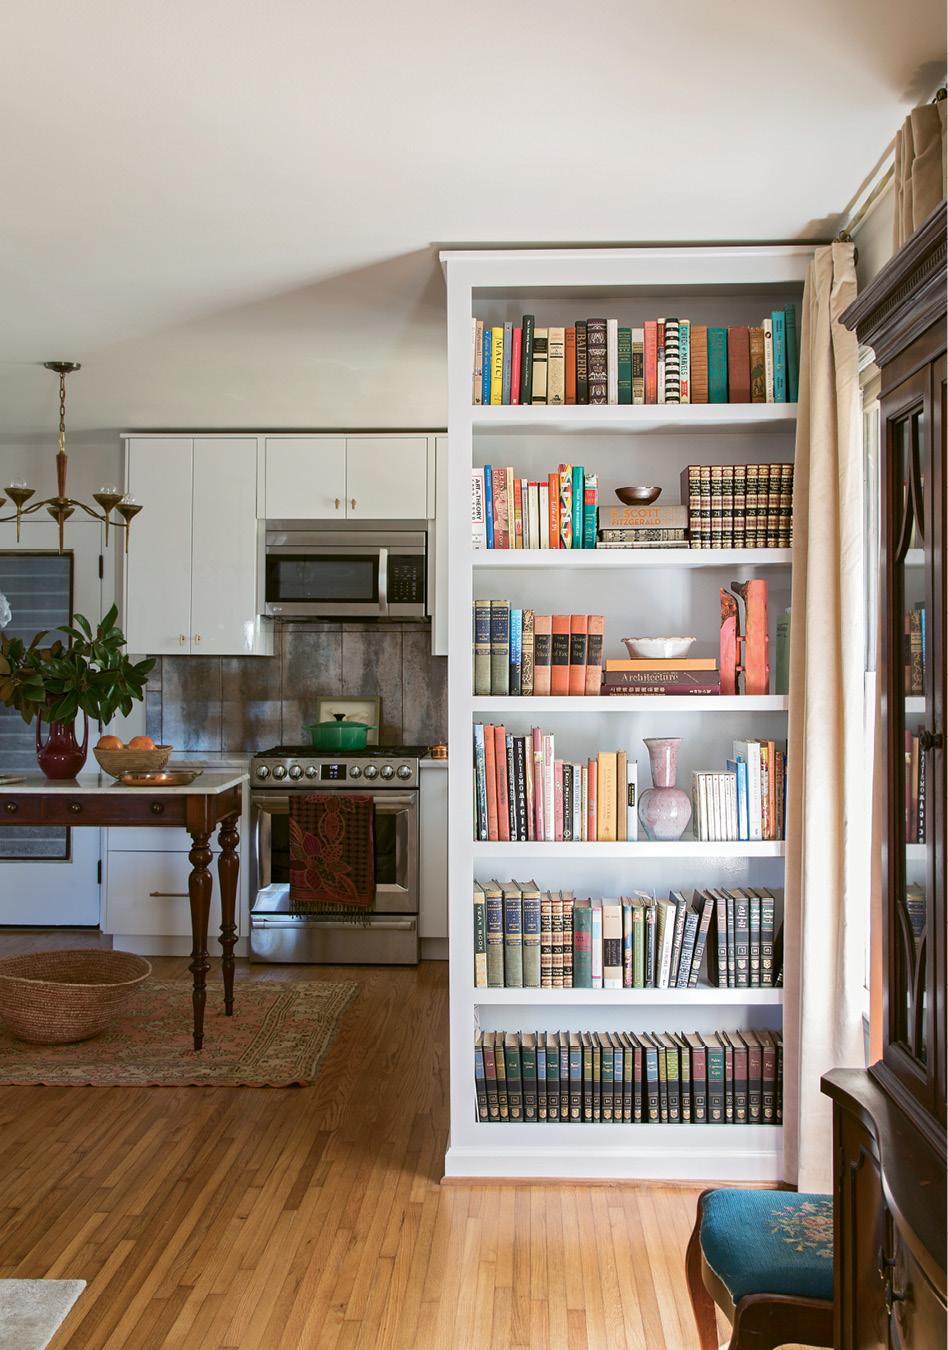 SHELF LIFE: To modernize the layout, Glennon advised taking down the wall separating the kitchen and dining nook. In its place, she added built-in bookshelves that keep the space visually open while still clearly defining individual rooms.